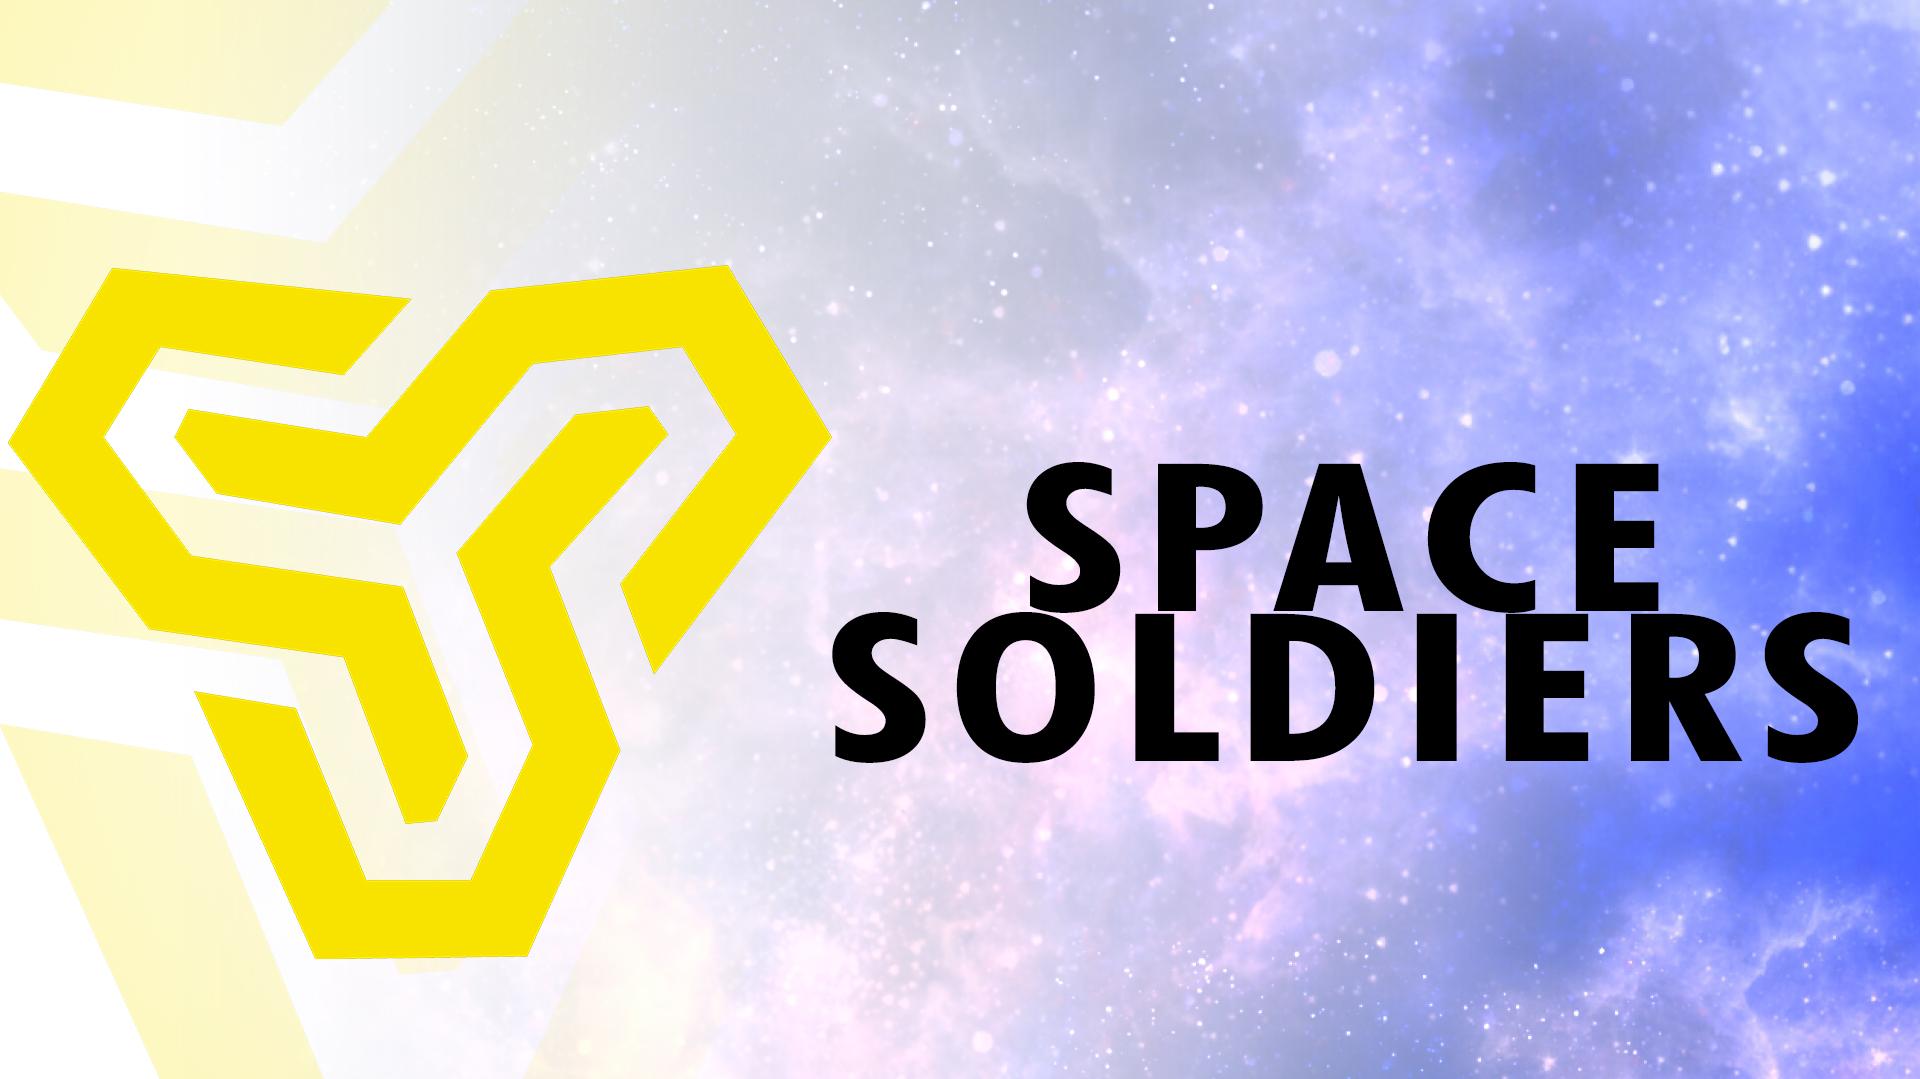 Space Soldiers Wallpaper FHD By Cobrasadventures On